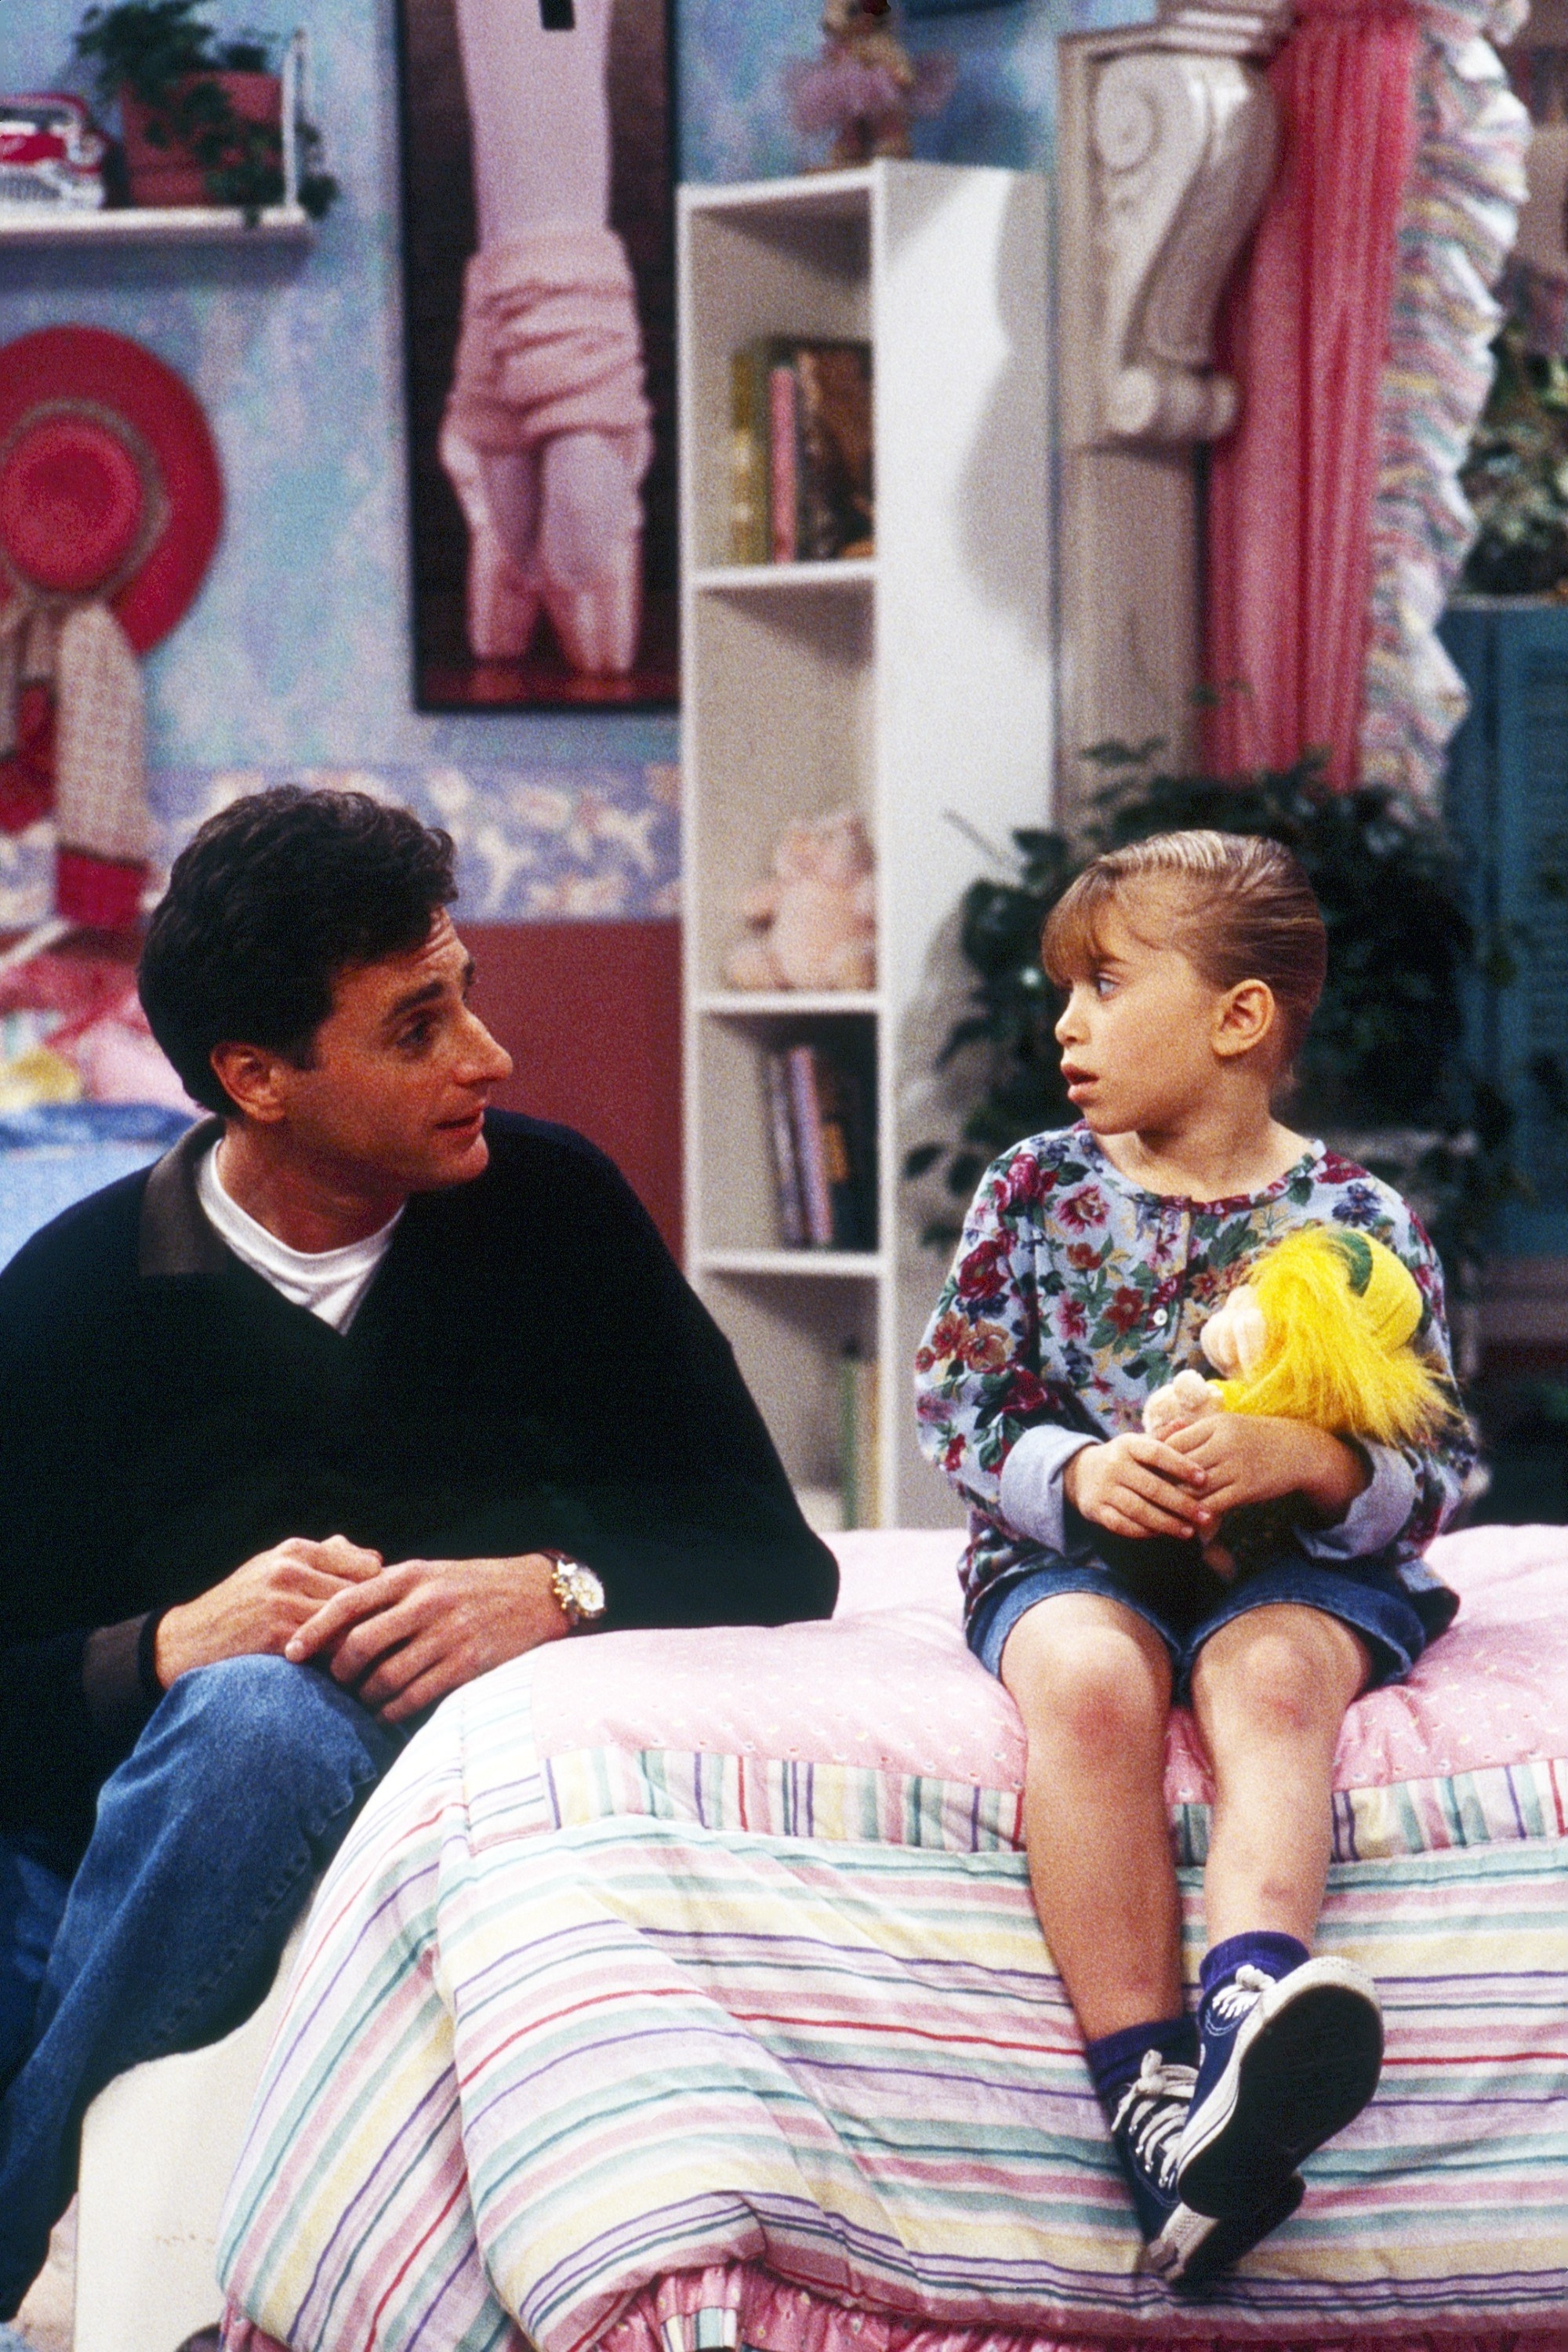 Danny Tanner speaks to his daughter